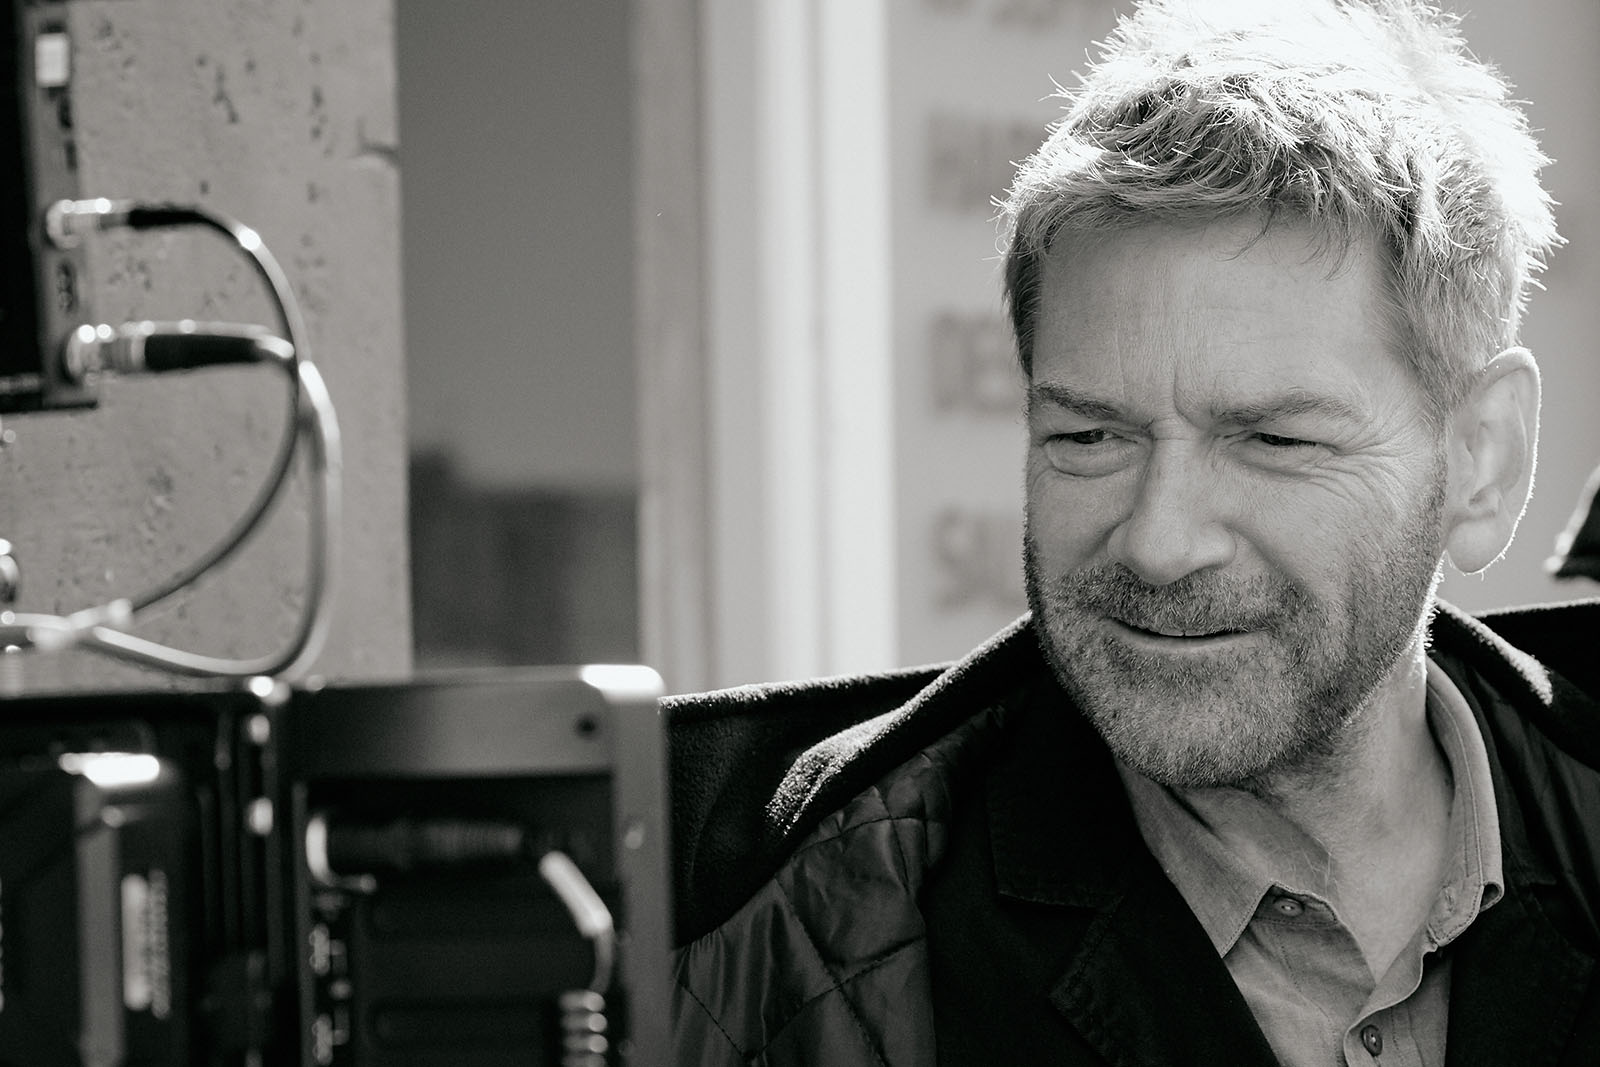 Kenneth Branagh watches the monitor on location for Belfast. Image © Focus Features